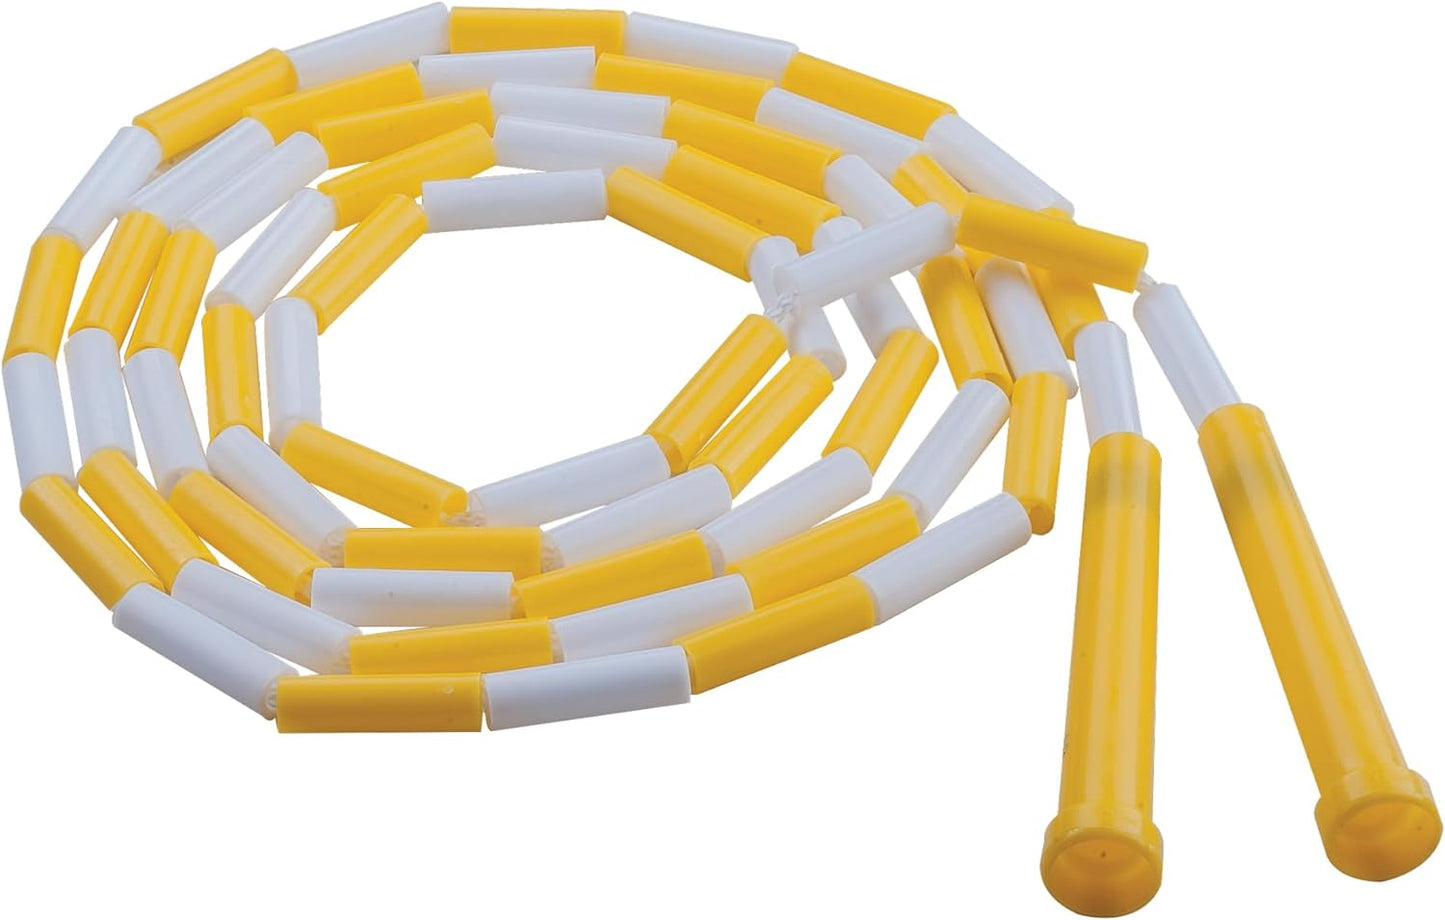 Classic Plastic Segmented Beaded Jump Ropes - Phys. Ed, Gym, Fitness and Recreational Use, in a Variety of Lengths for Kids to Adults